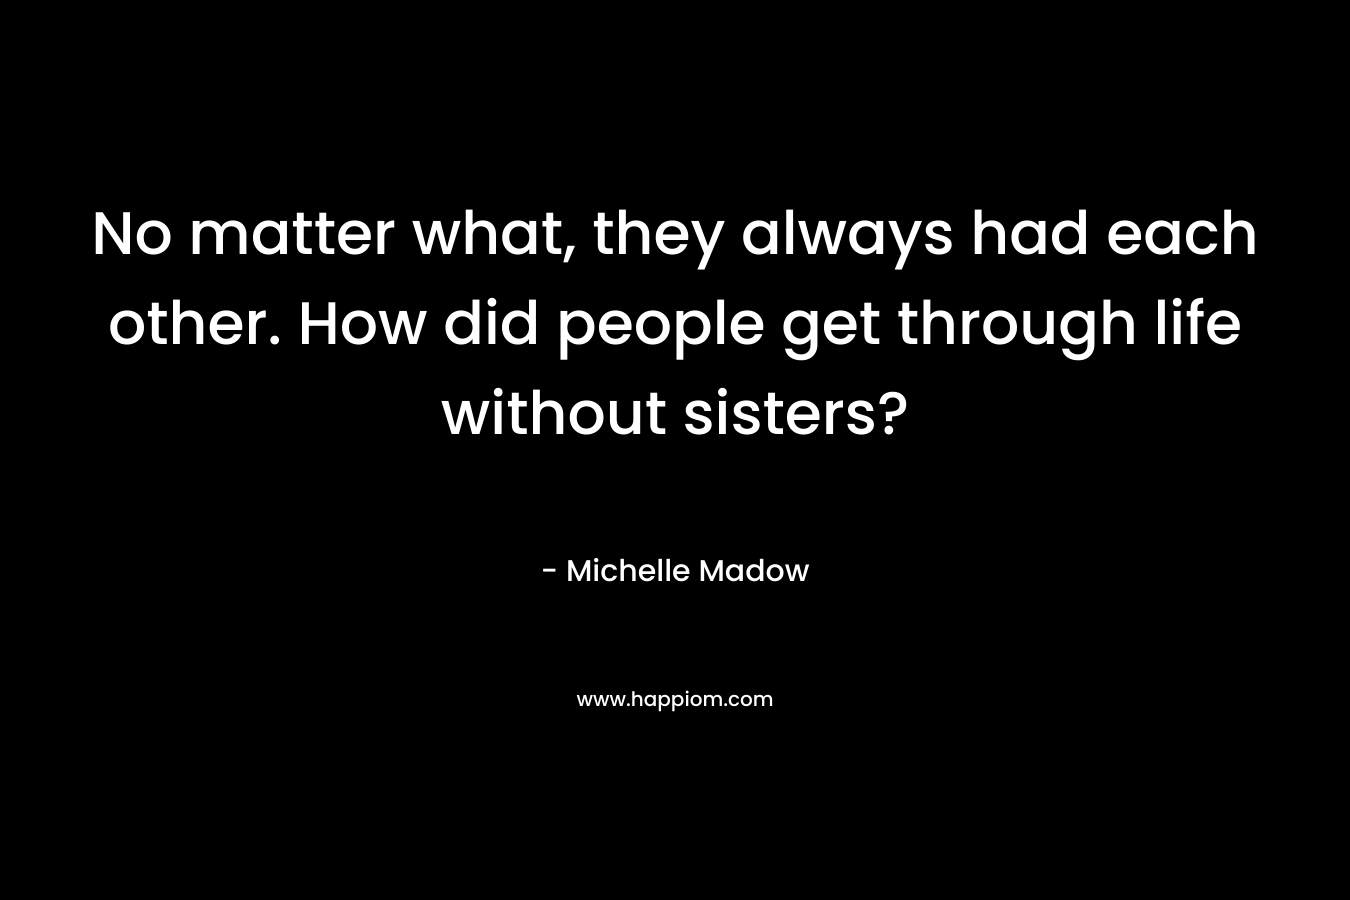 No matter what, they always had each other. How did people get through life without sisters?